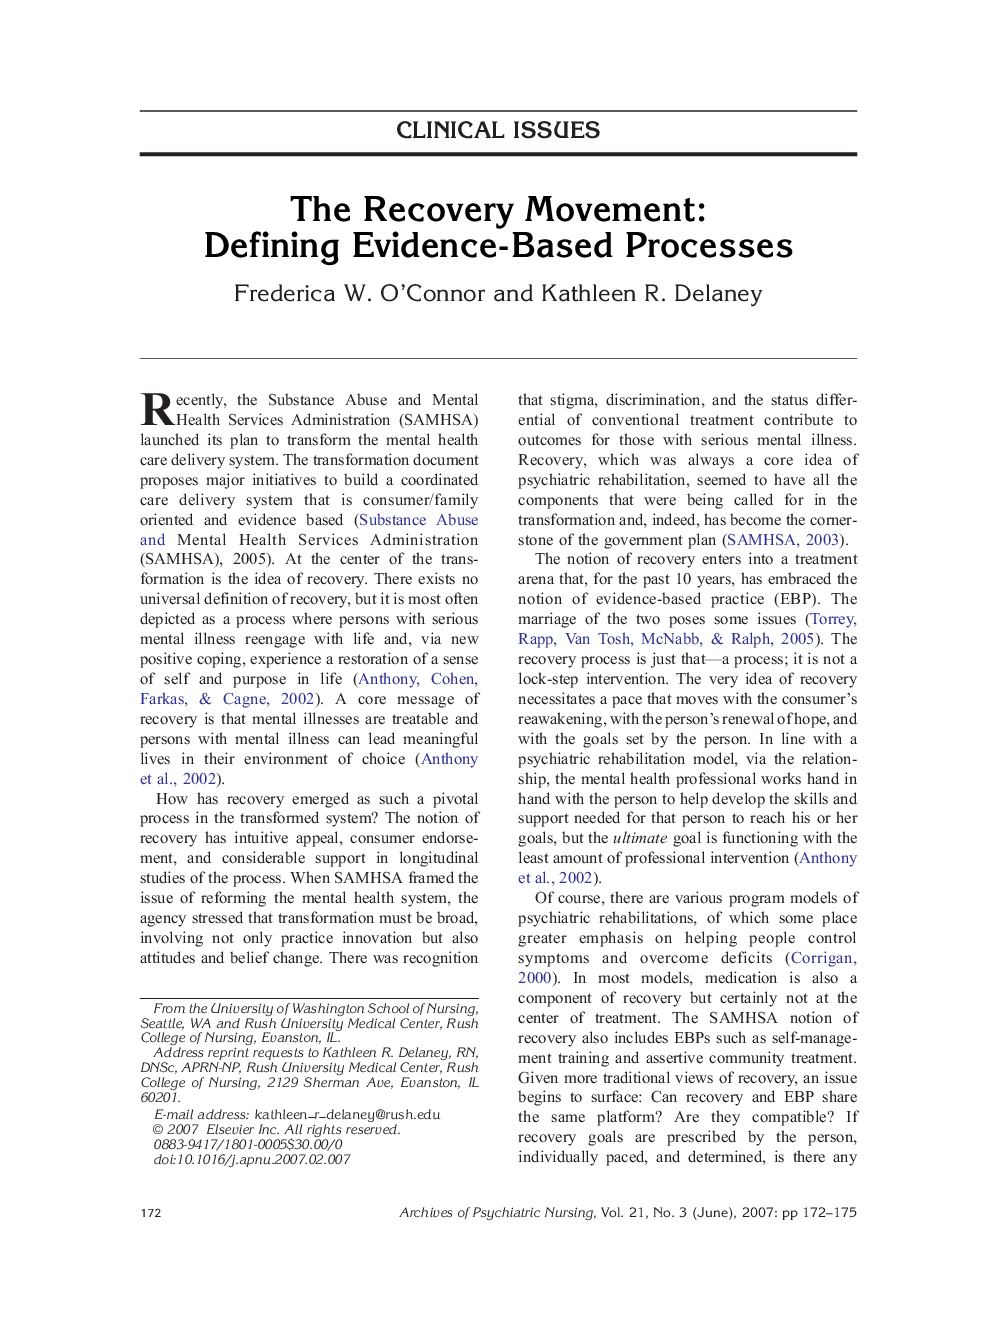 The Recovery Movement: Defining Evidence-Based Processes